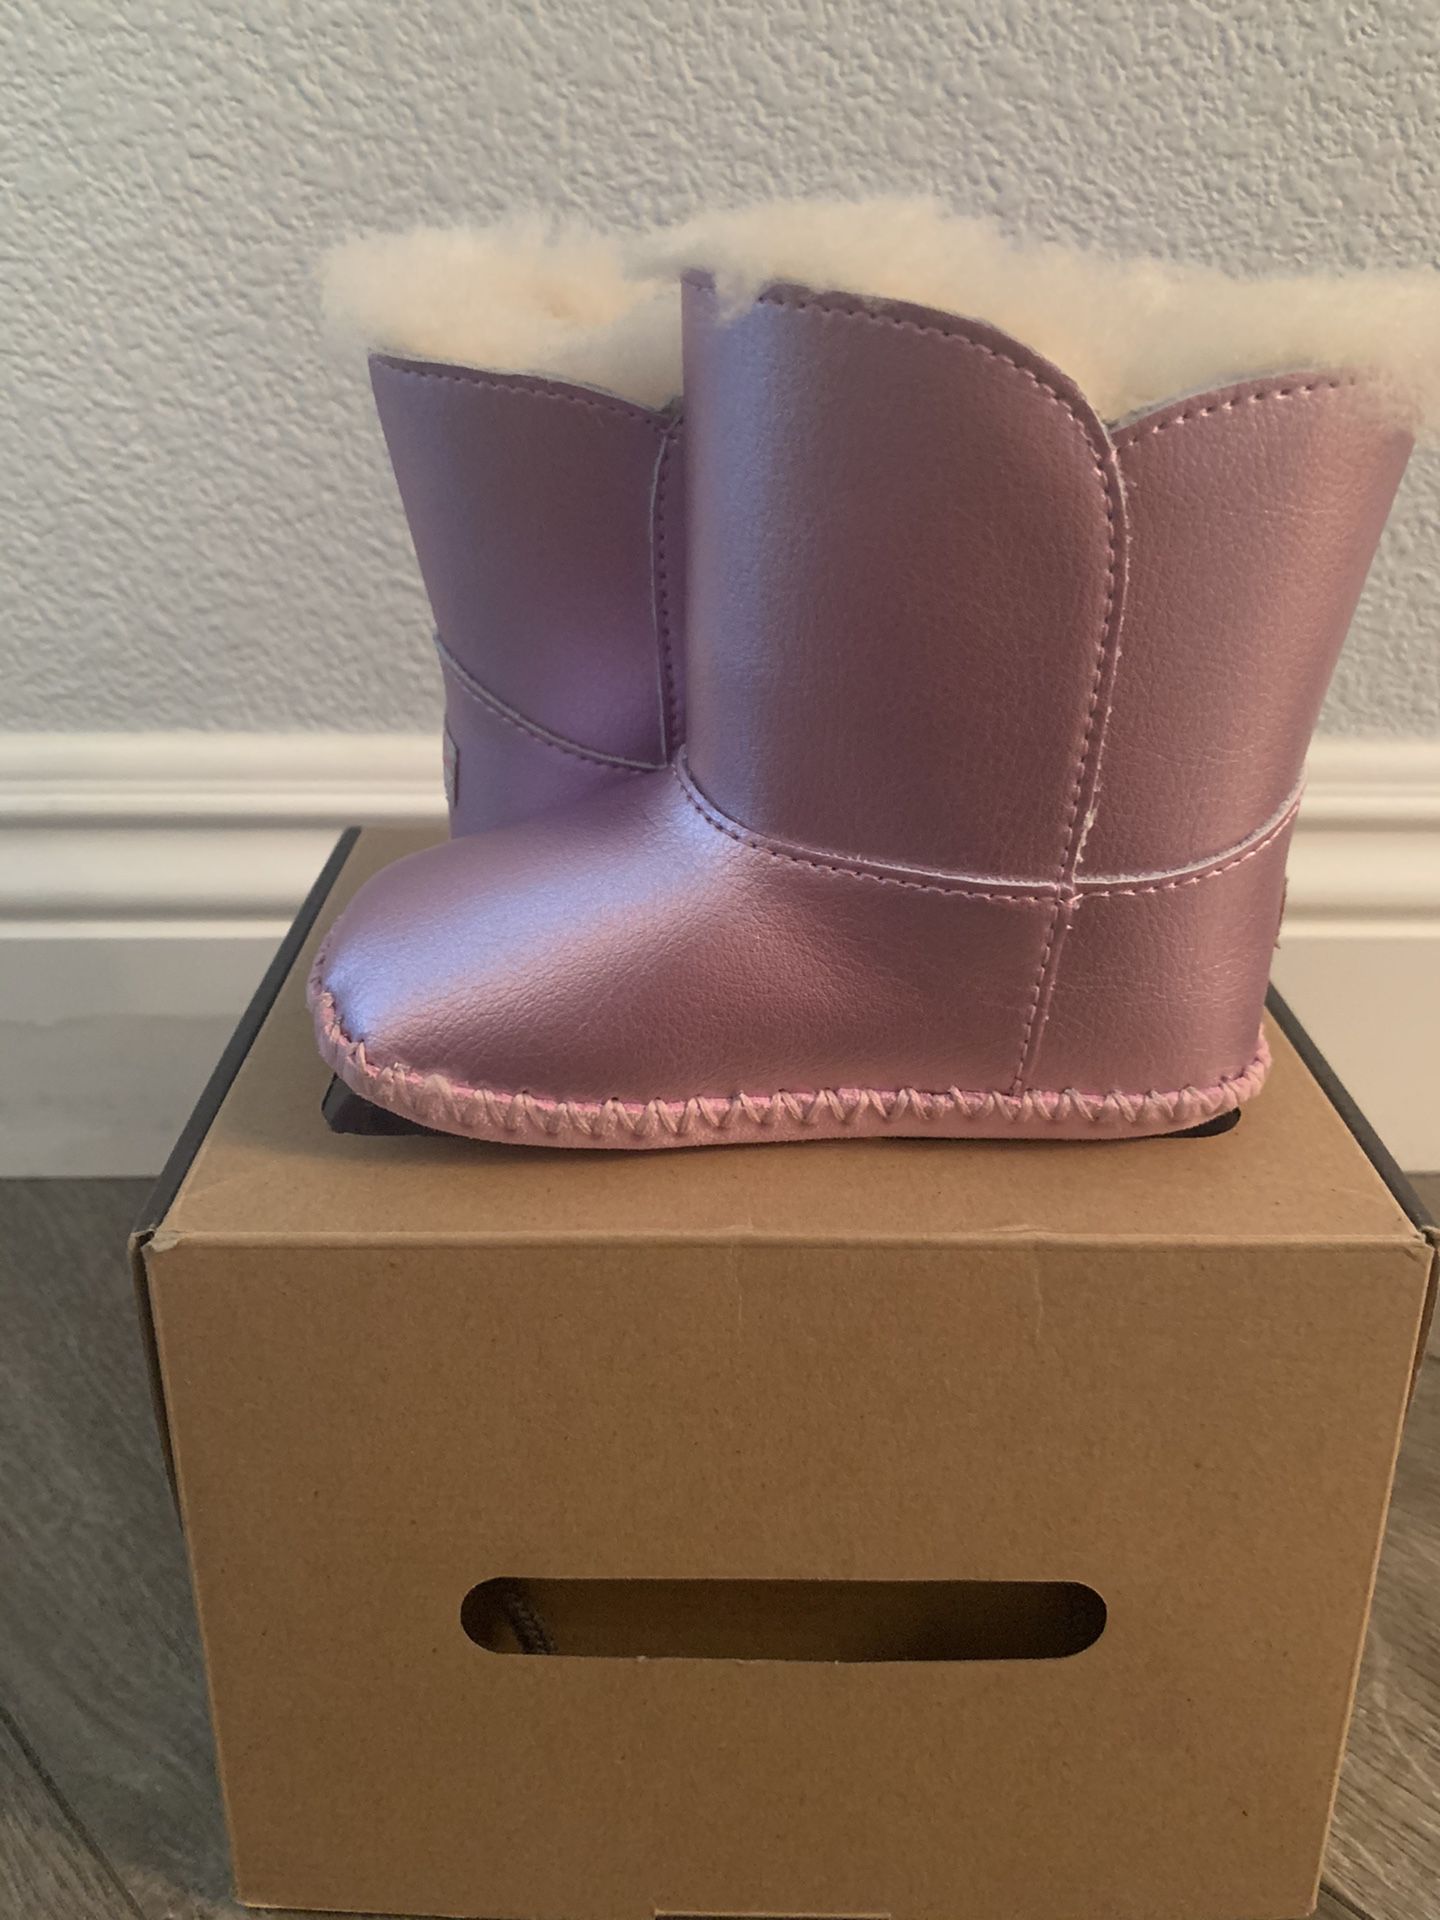 Ugg boots size 4/5